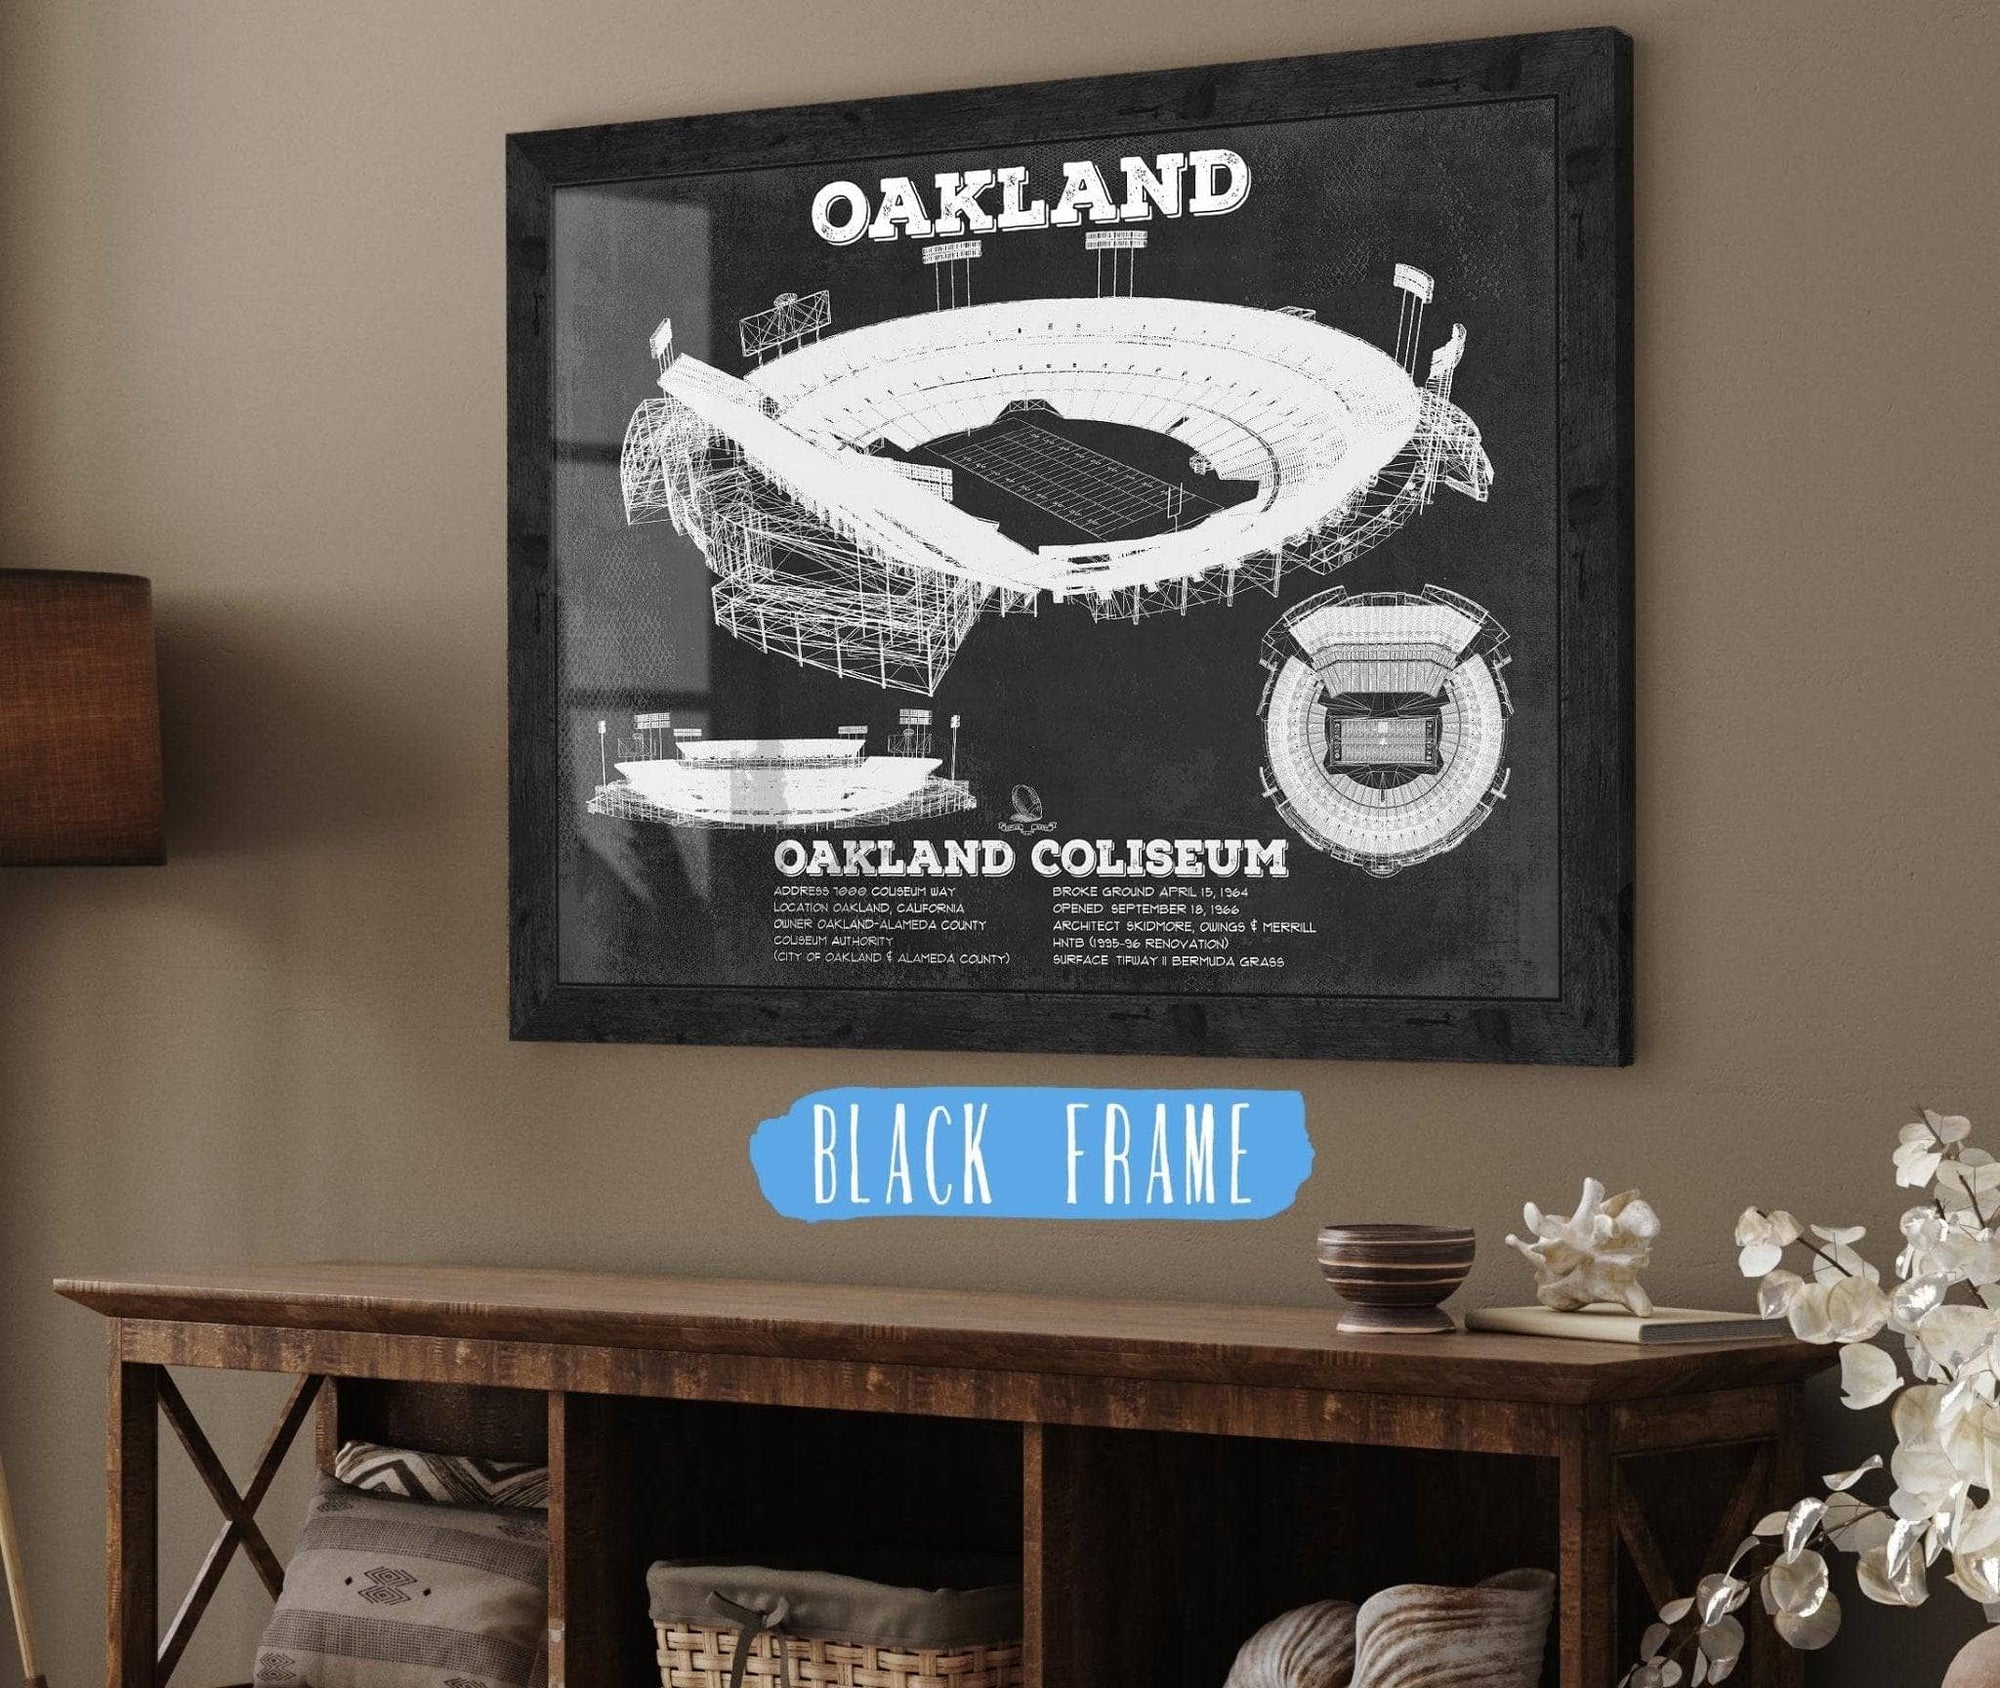 Cutler West Pro Football Collection 14" x 11" / Black Frame Oakland Raiders Team Color Alameda County Coliseum Seating Chart - Vintage Football Print 920787395-TOP_70494